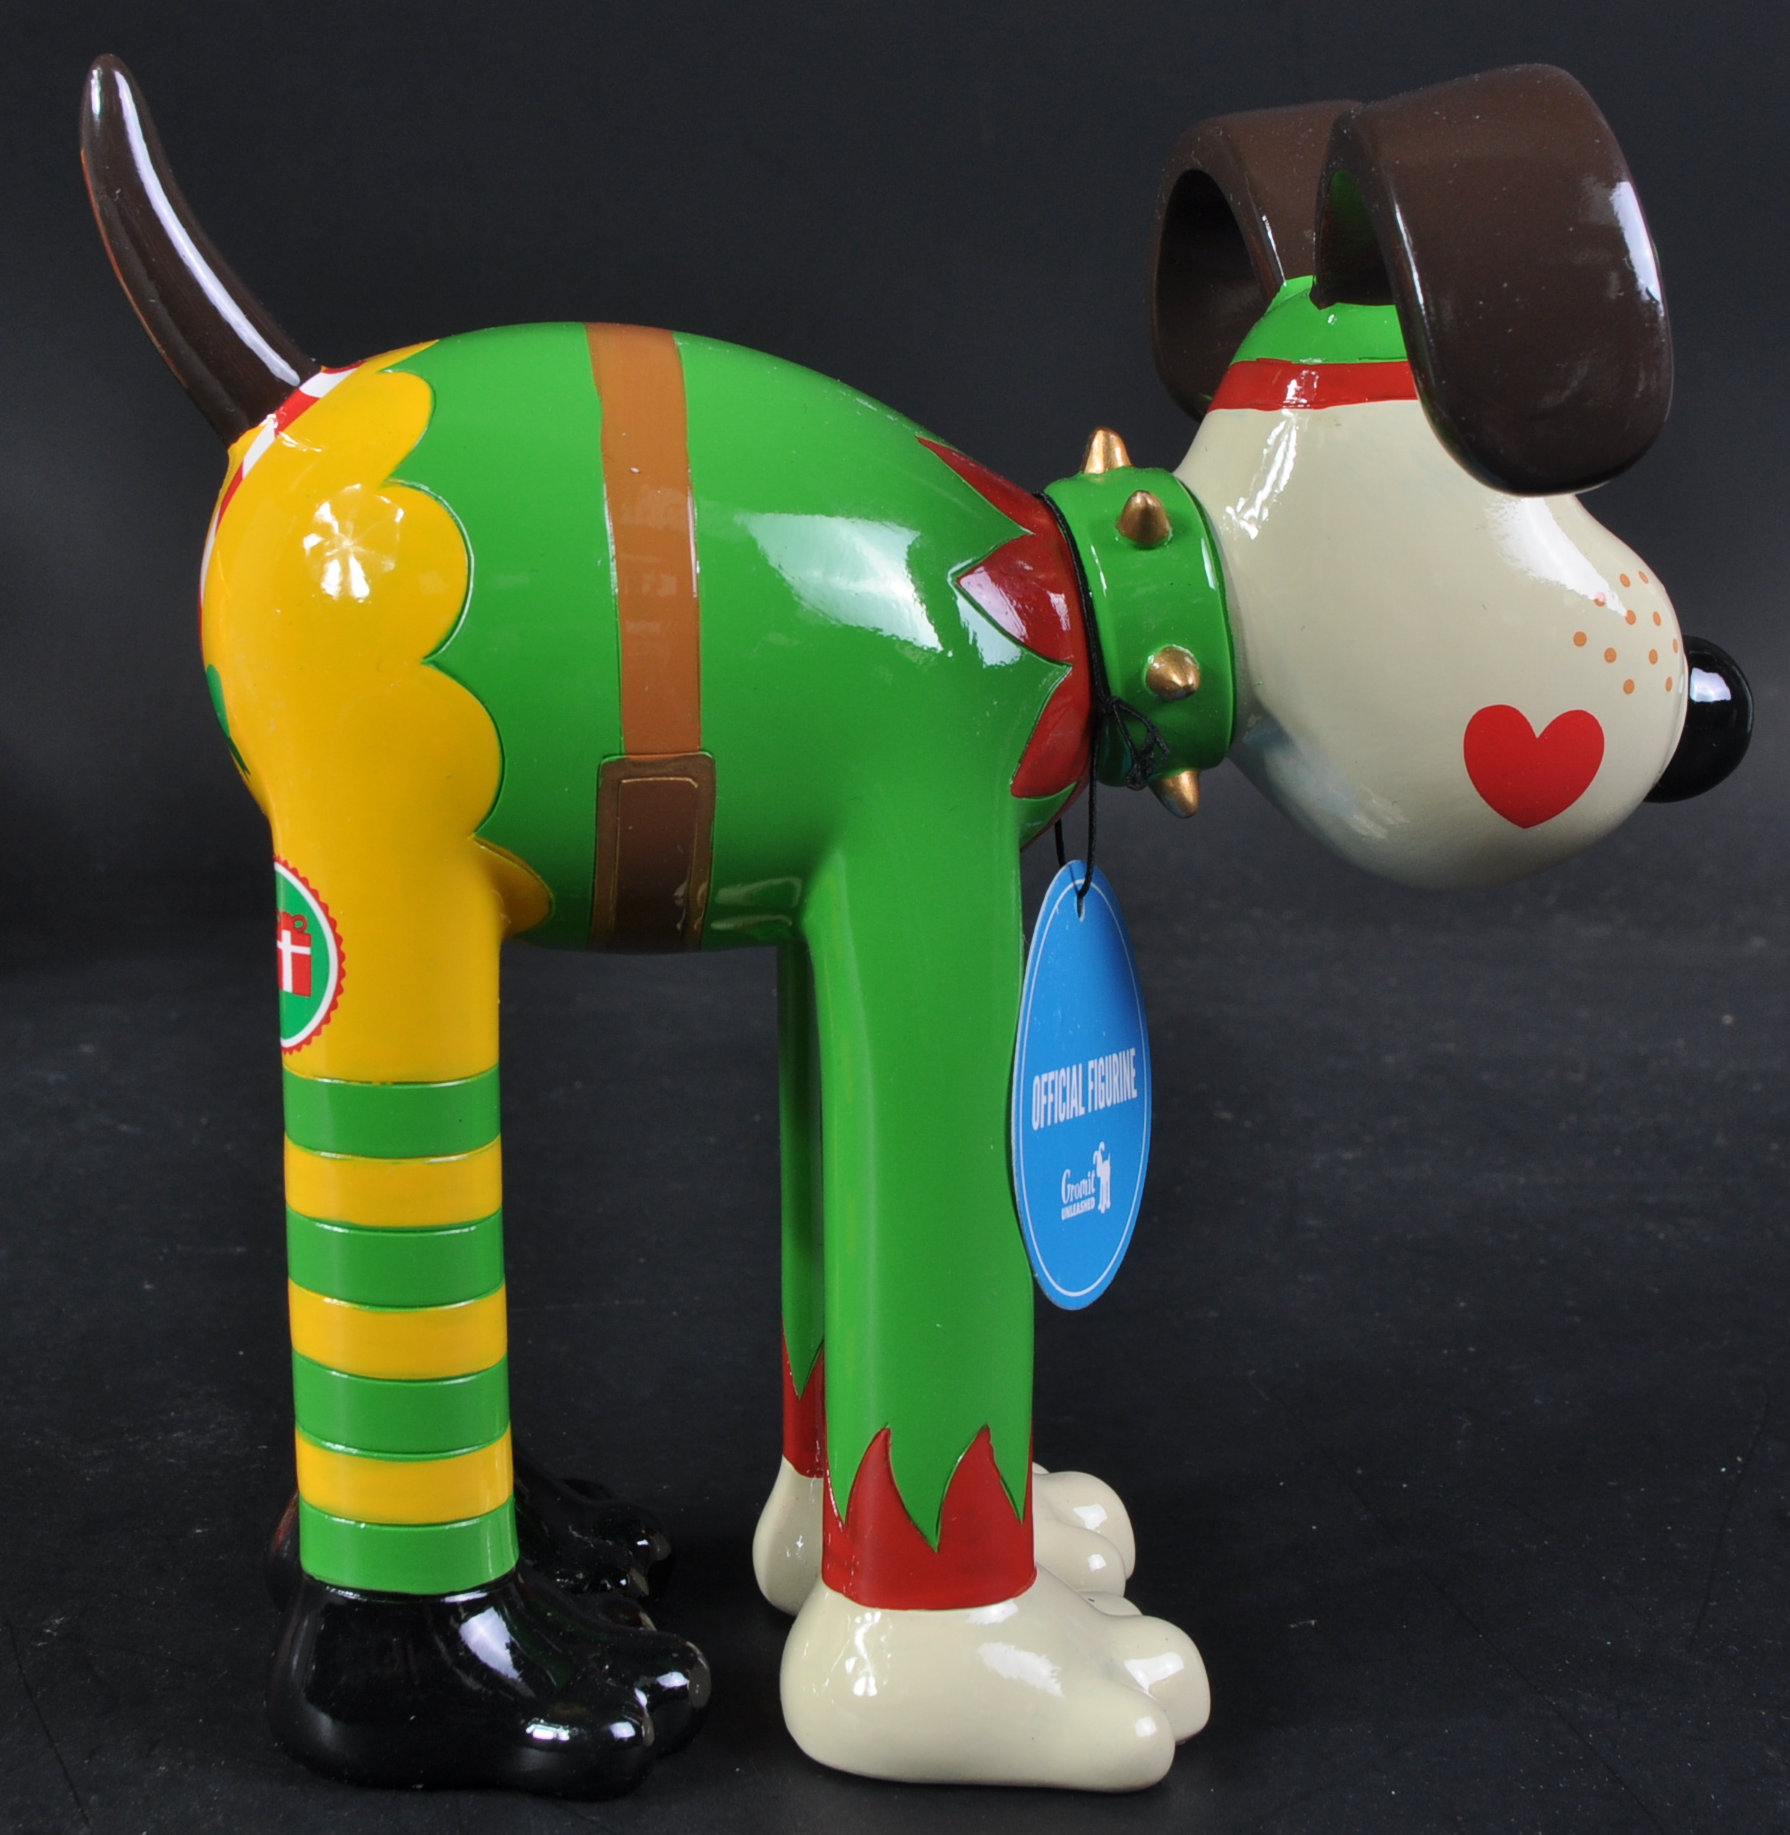 WALLACE & GROMIT - GROMIT UNLEASHED COLLECTABLE FIGURINE - Image 6 of 8